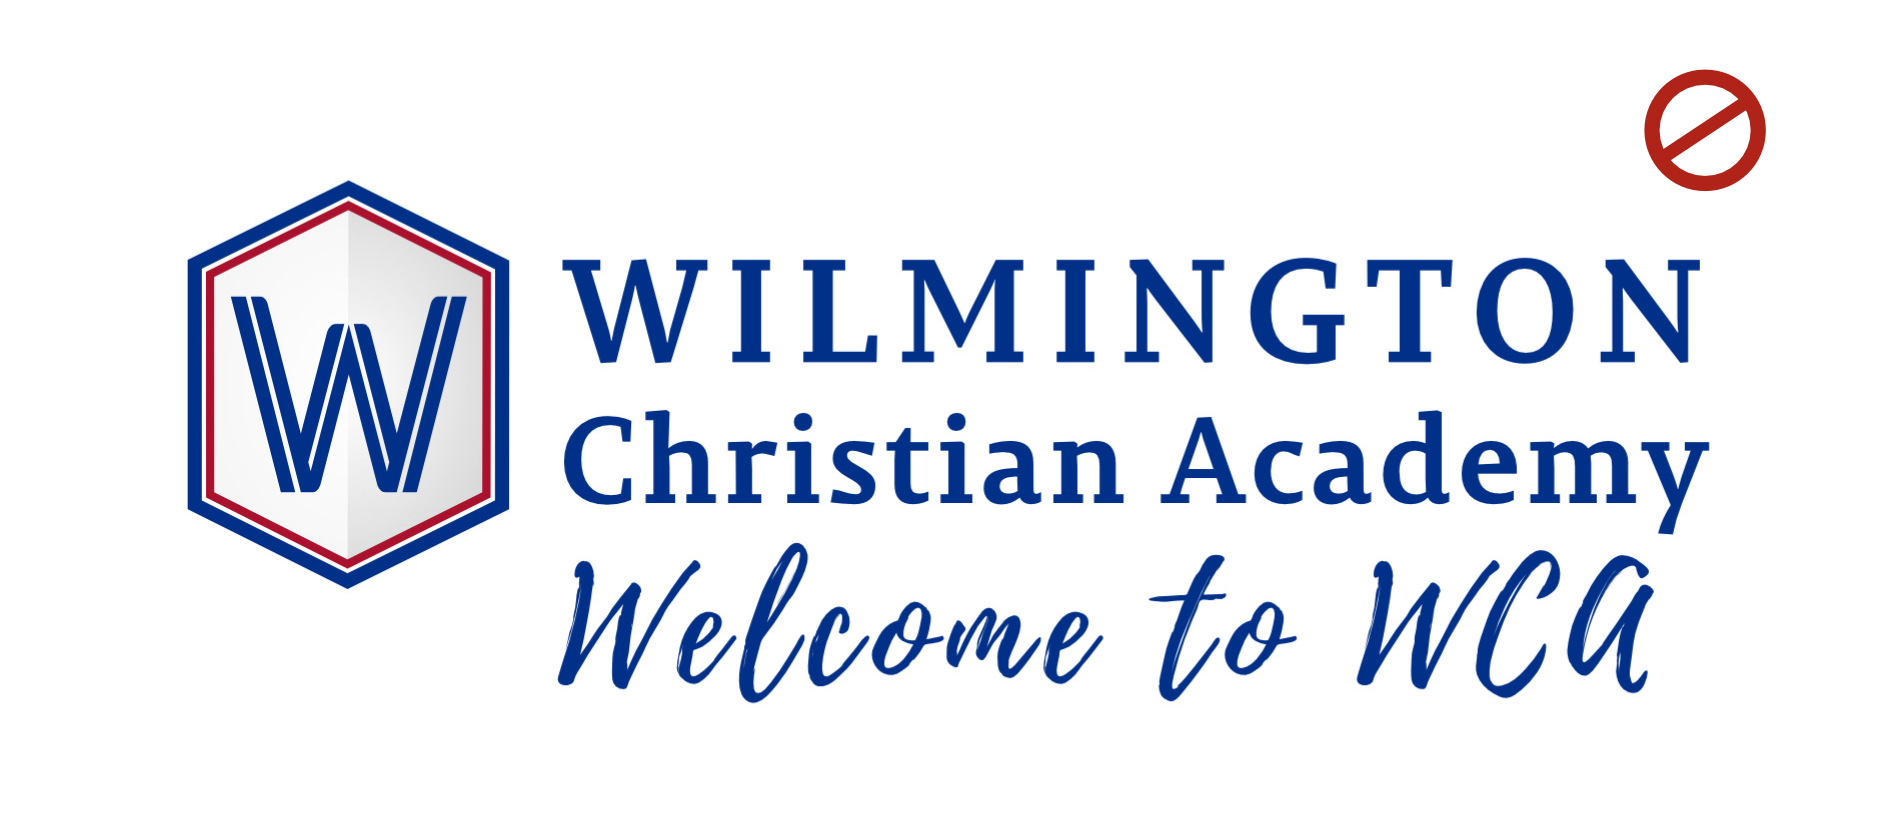 Wilmington Christian Academy Archives - Page 2 of 4 - WWAYTV3